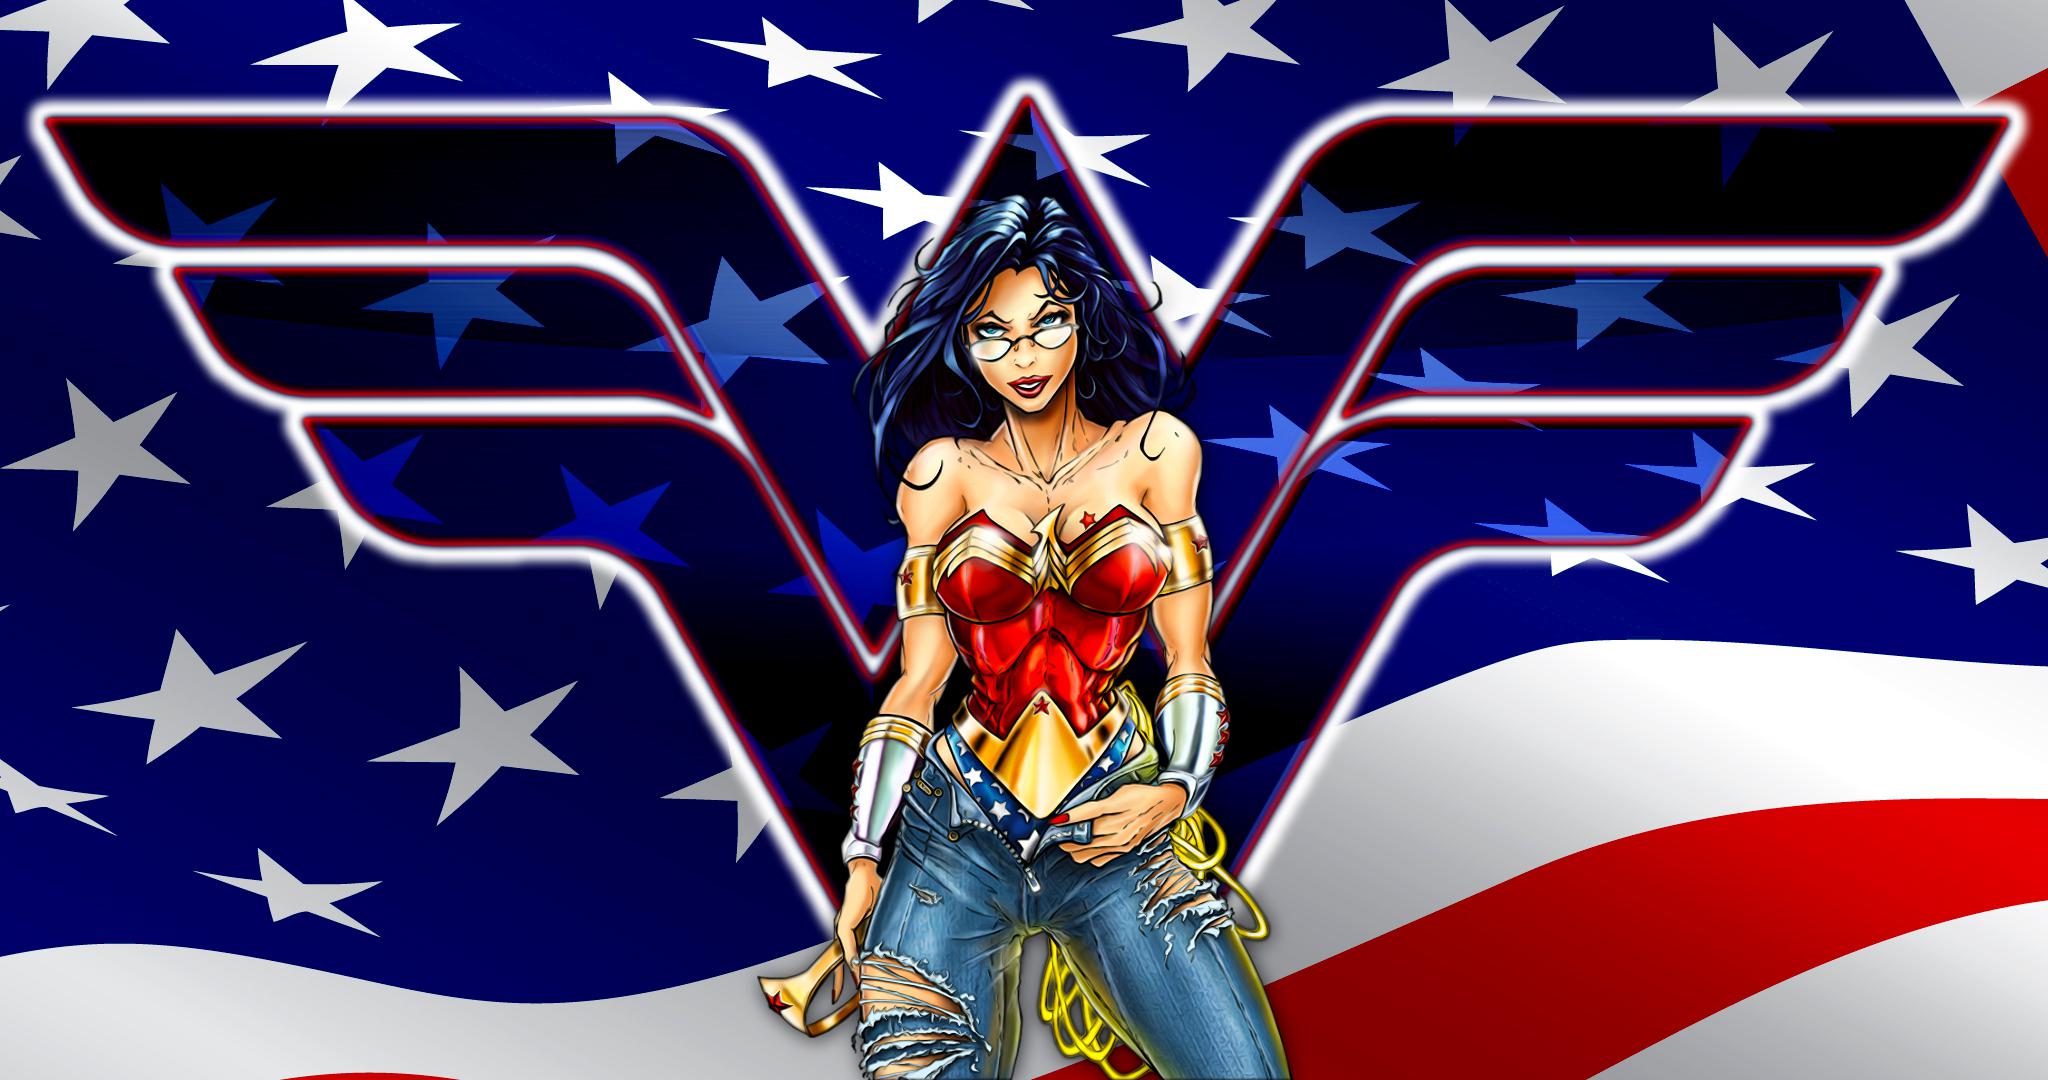 Free download Wonder woman 152497 High Quality and Resolution Wallpapers on...